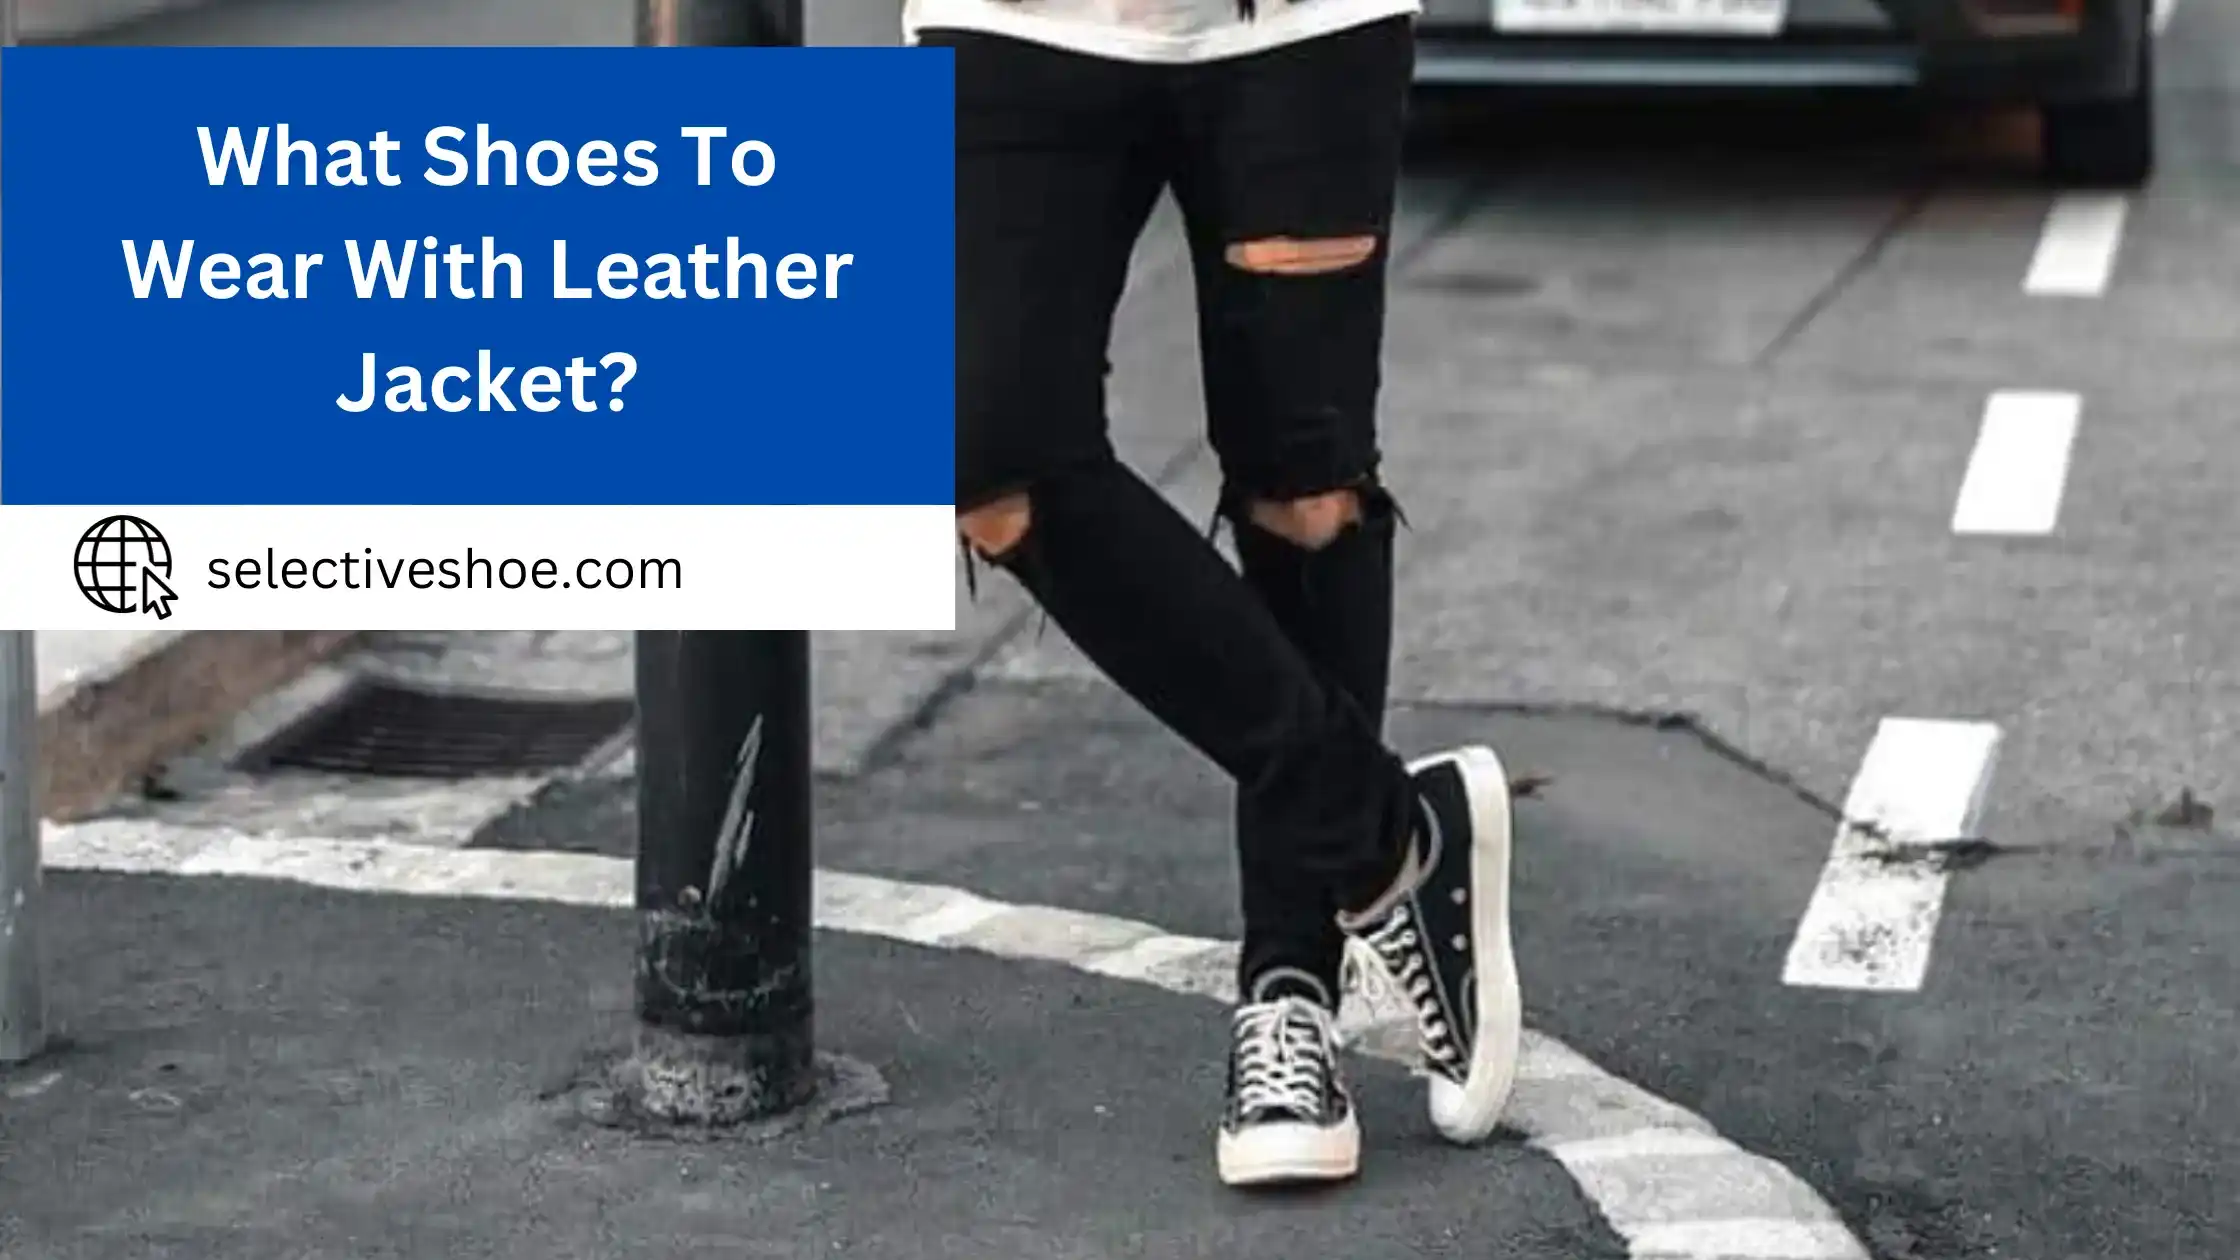 What Shoes to Wear with Leather Jacket?